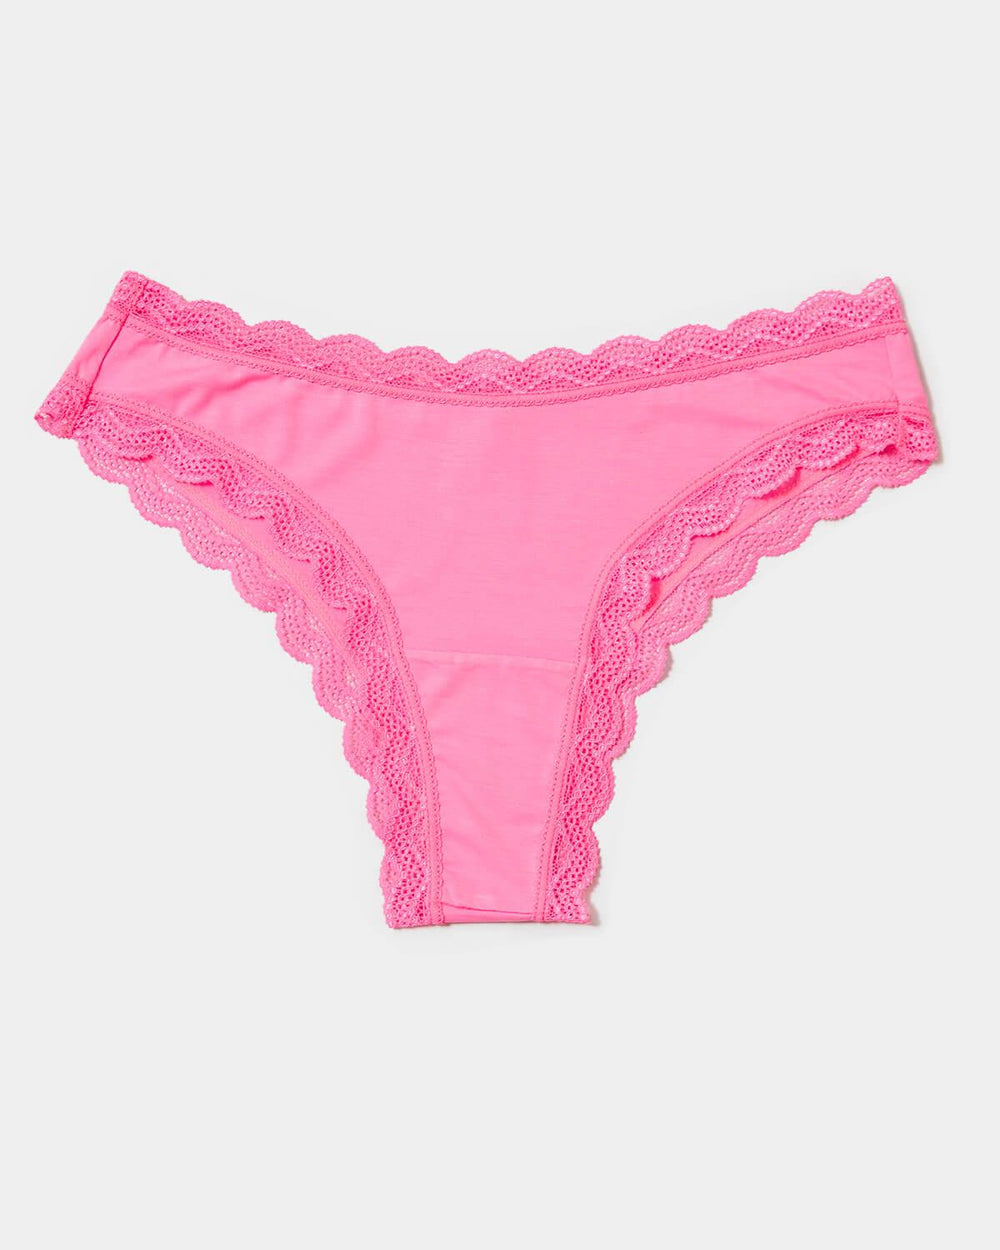 PINK -Victoria's Secret - Extra Low Rise Hipster Cut Out Side Panty Medium  M NWT